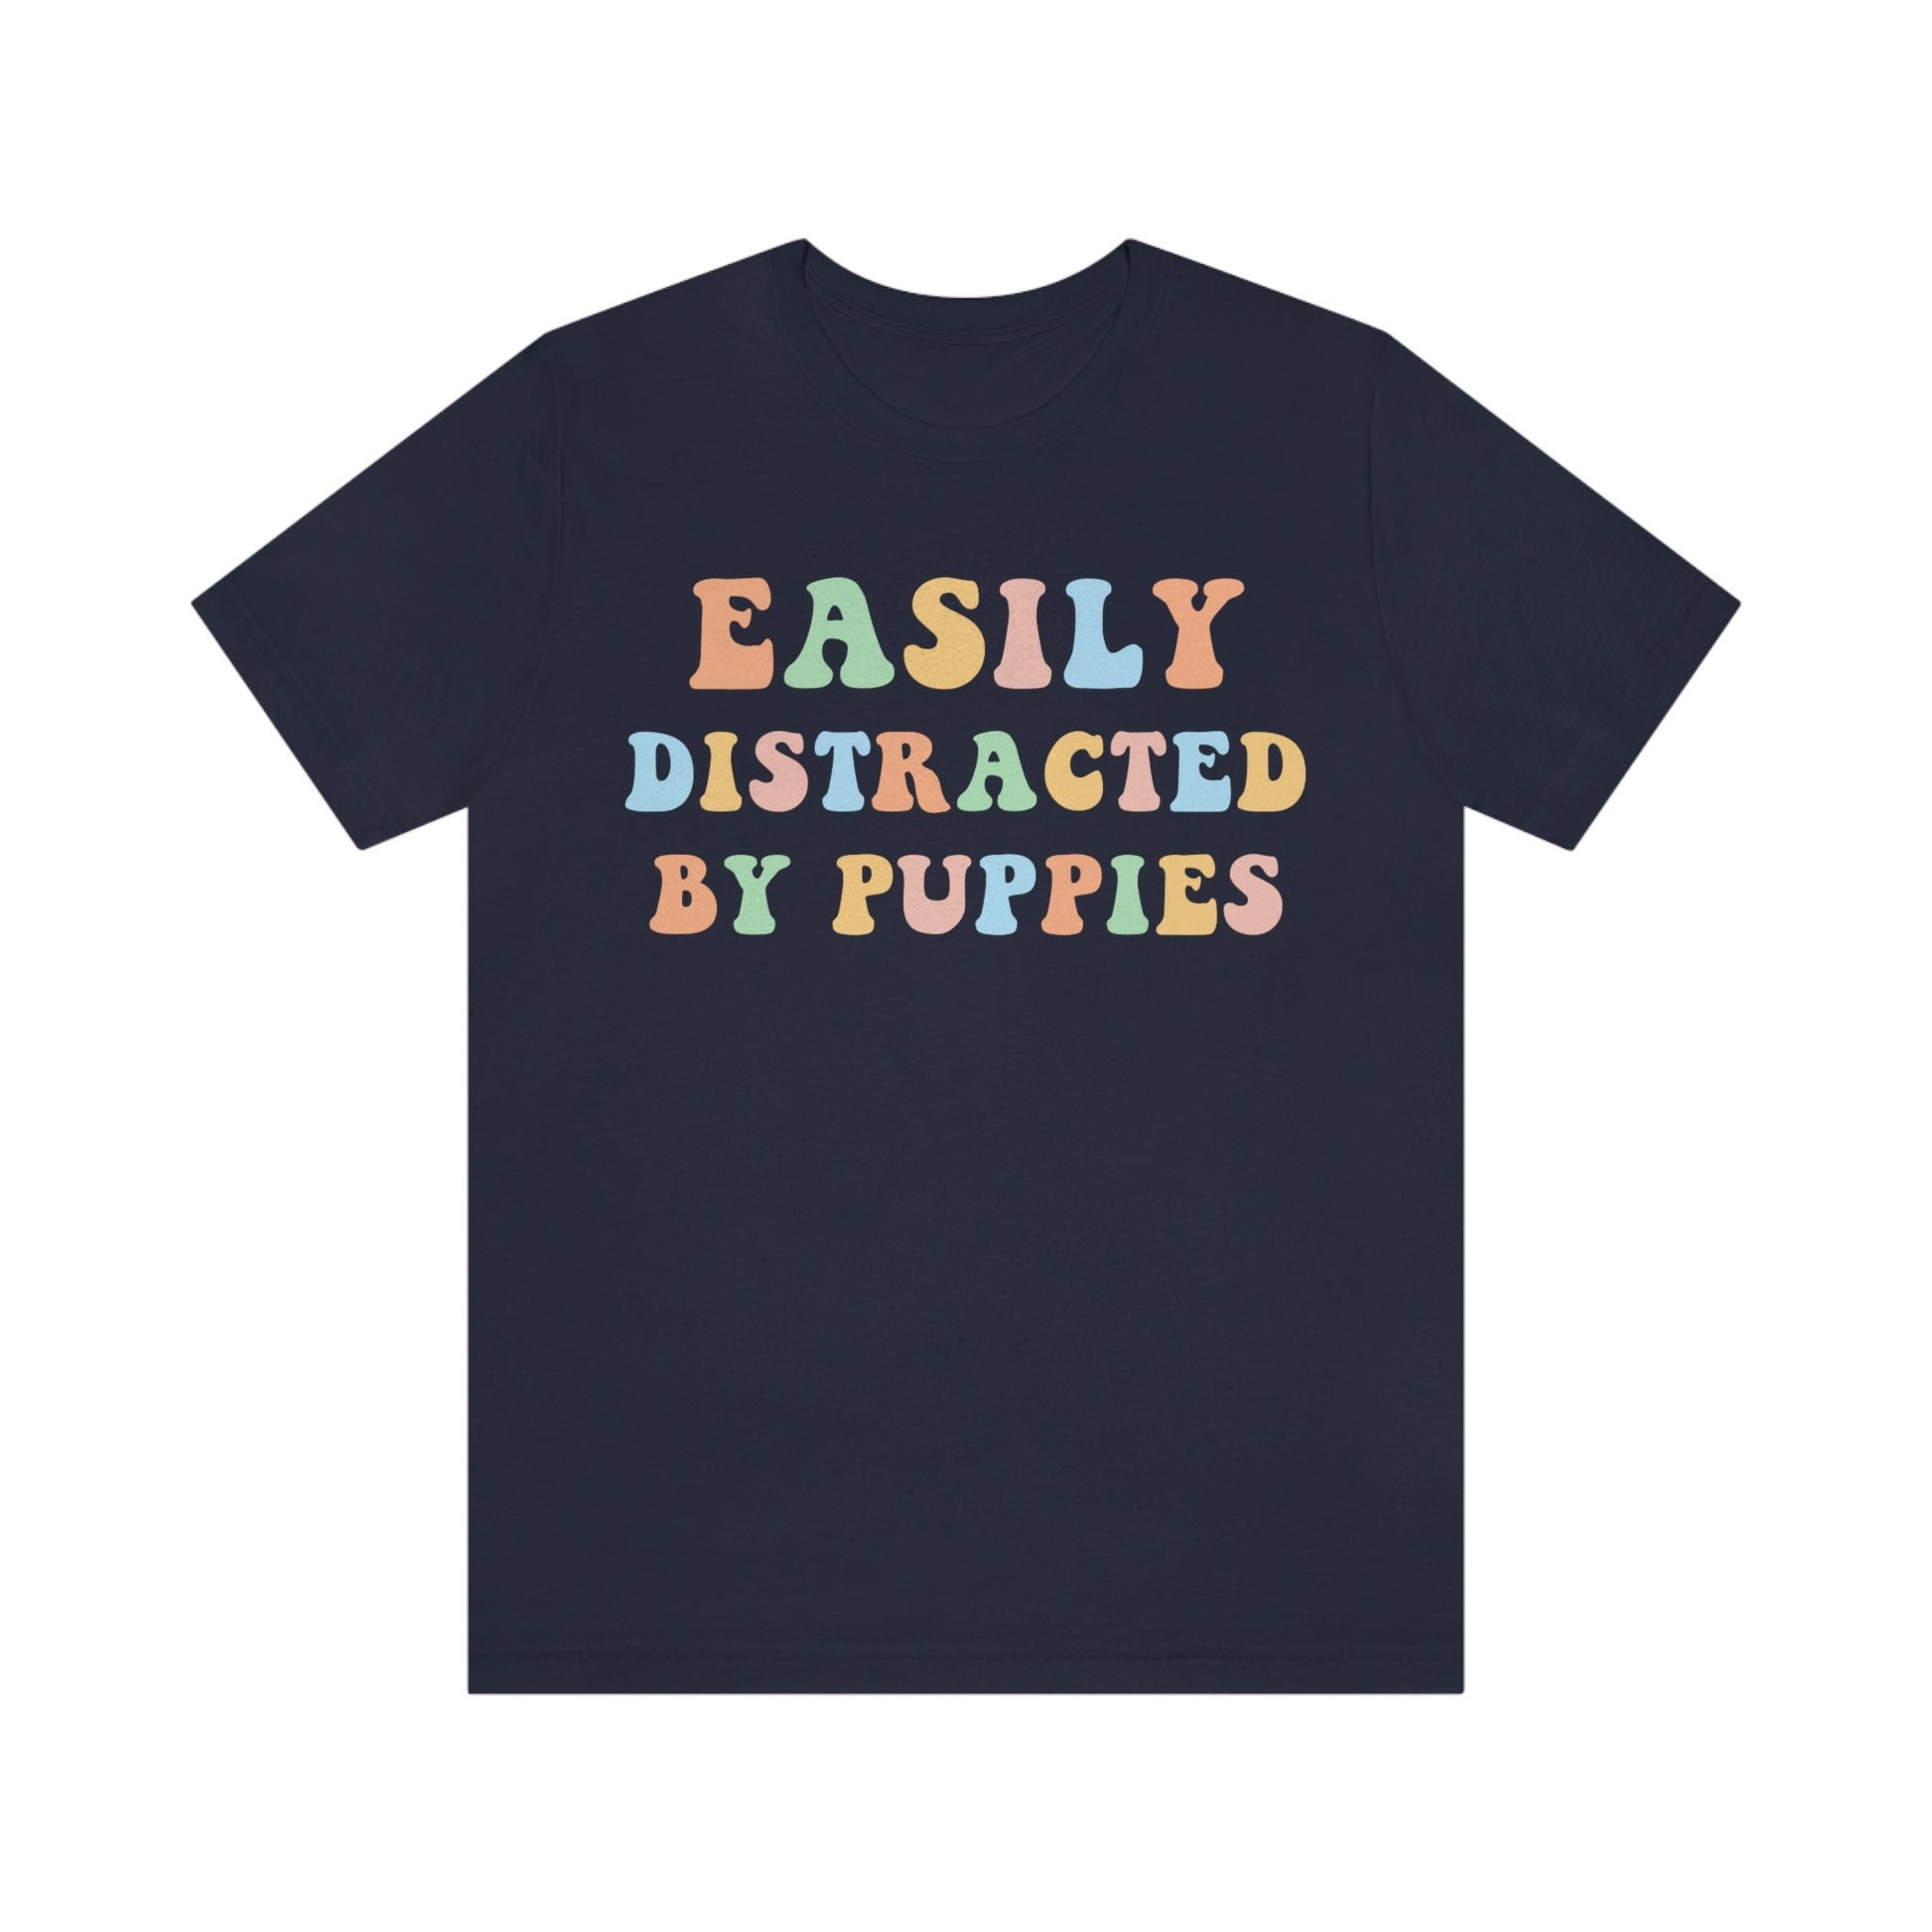 Easily Distracted by Puppies gift t-shirt for Dog Owners, Cute Dog Lover t-shirt - 37 Design Unit